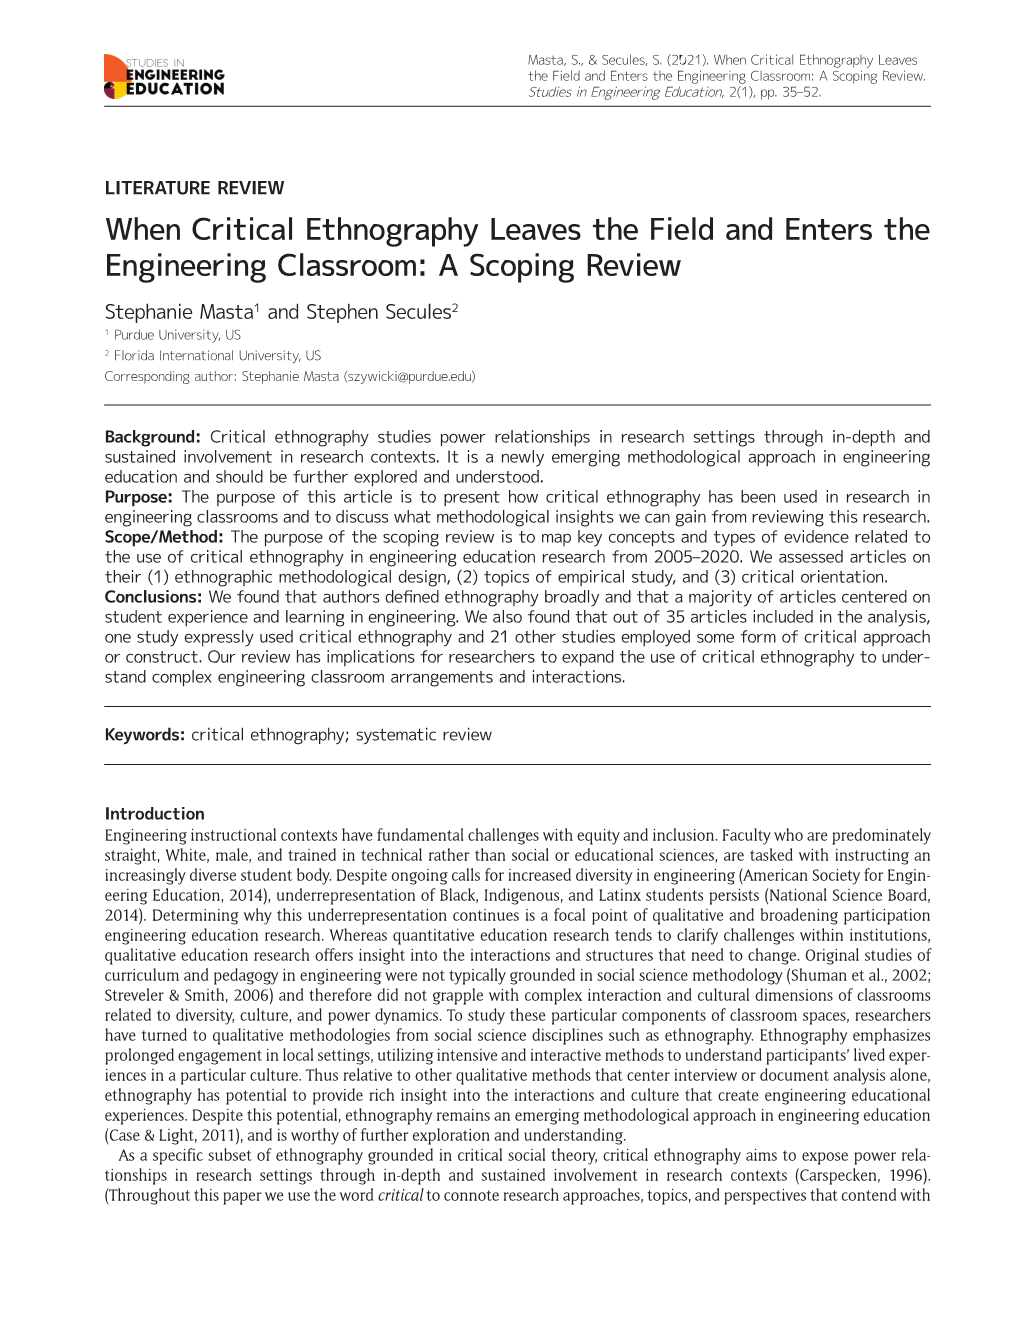 When Critical Ethnography Leaves the Field and Enters the Engineering Classroom: a Scoping Review